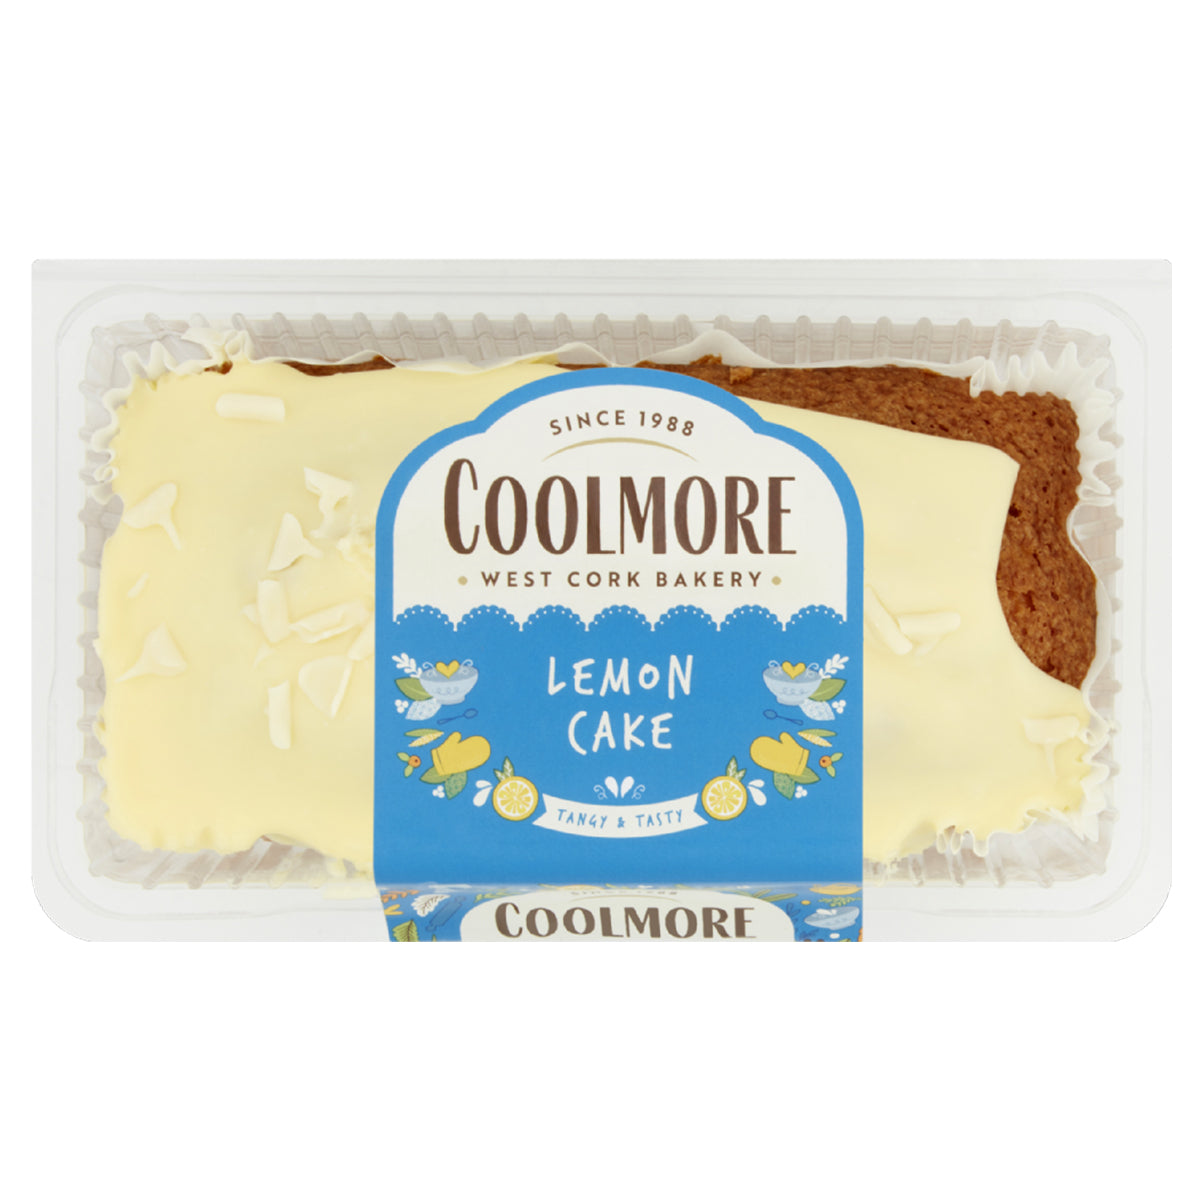 Coolmore - Lemon Cake - 400g in a plastic container.